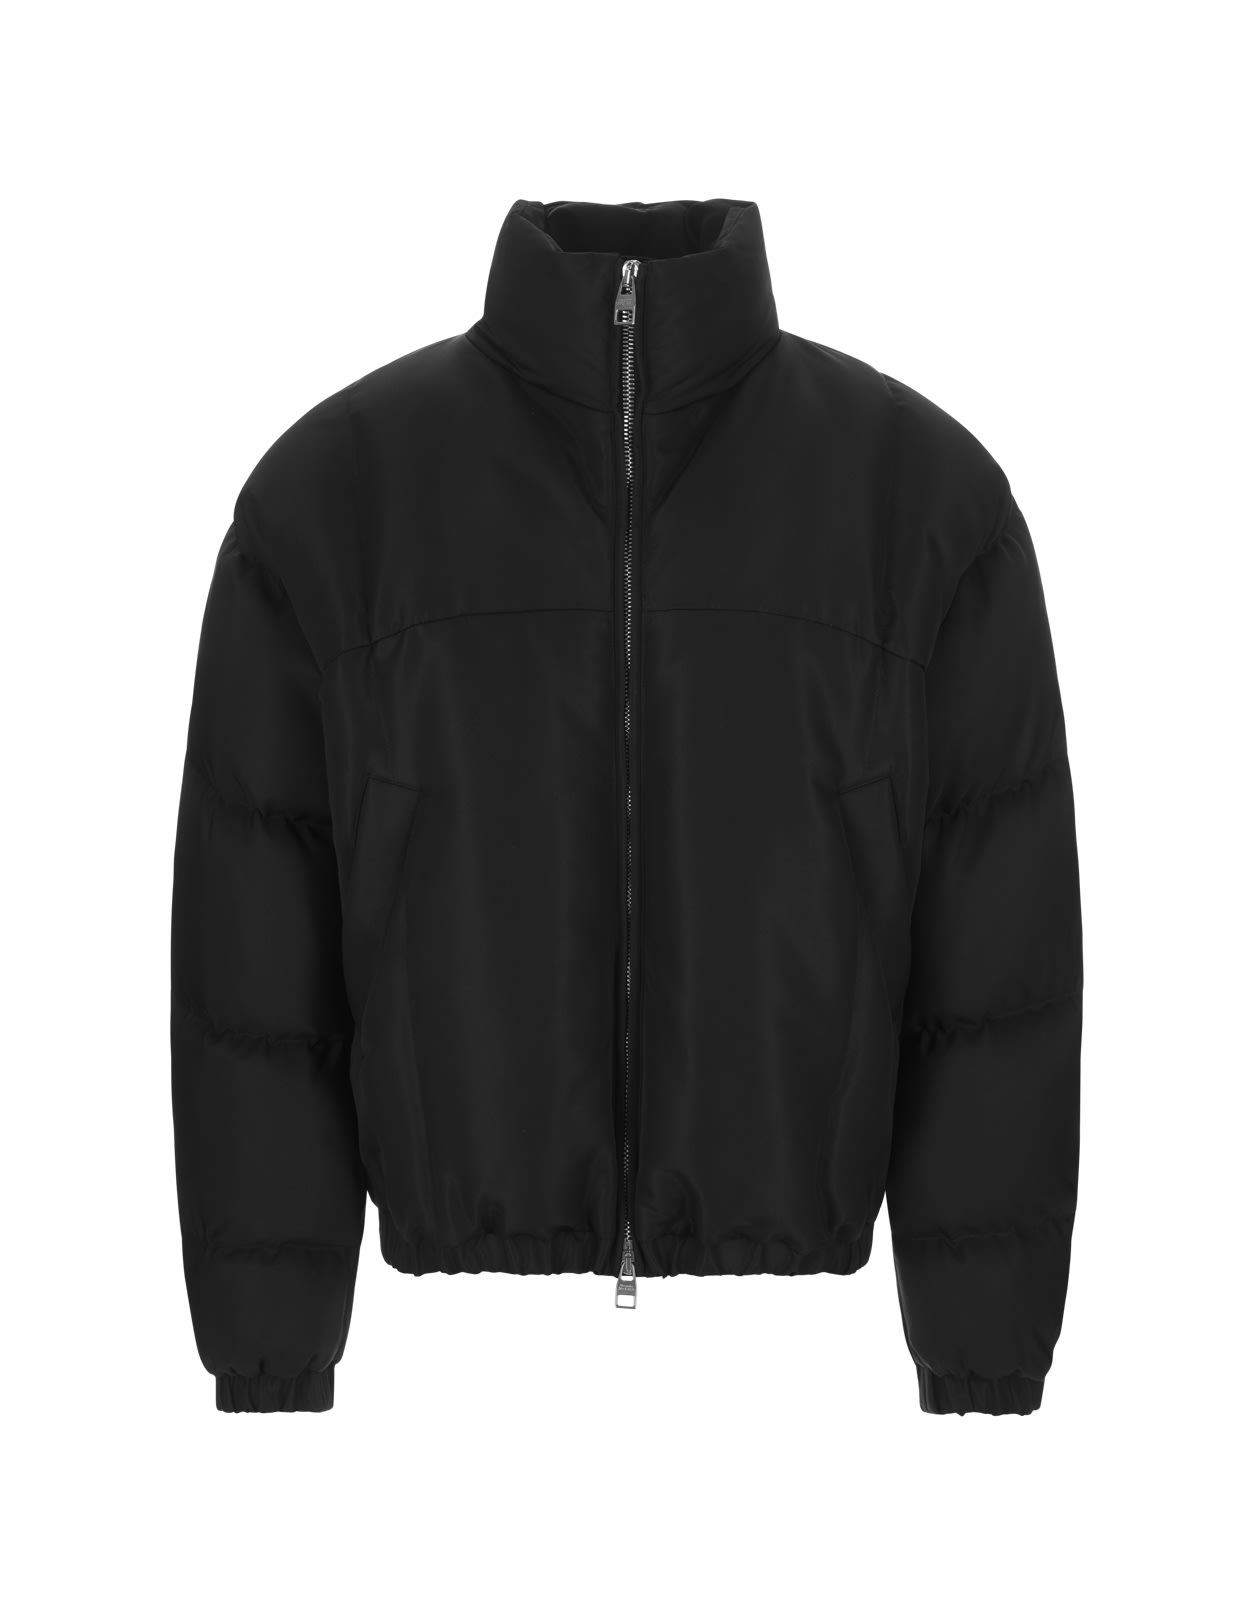 ALEXANDER MCQUEEN BLACK PADDED JACKET WITH SEAL EMBROIDERY ALEXANDER MCQUEEN